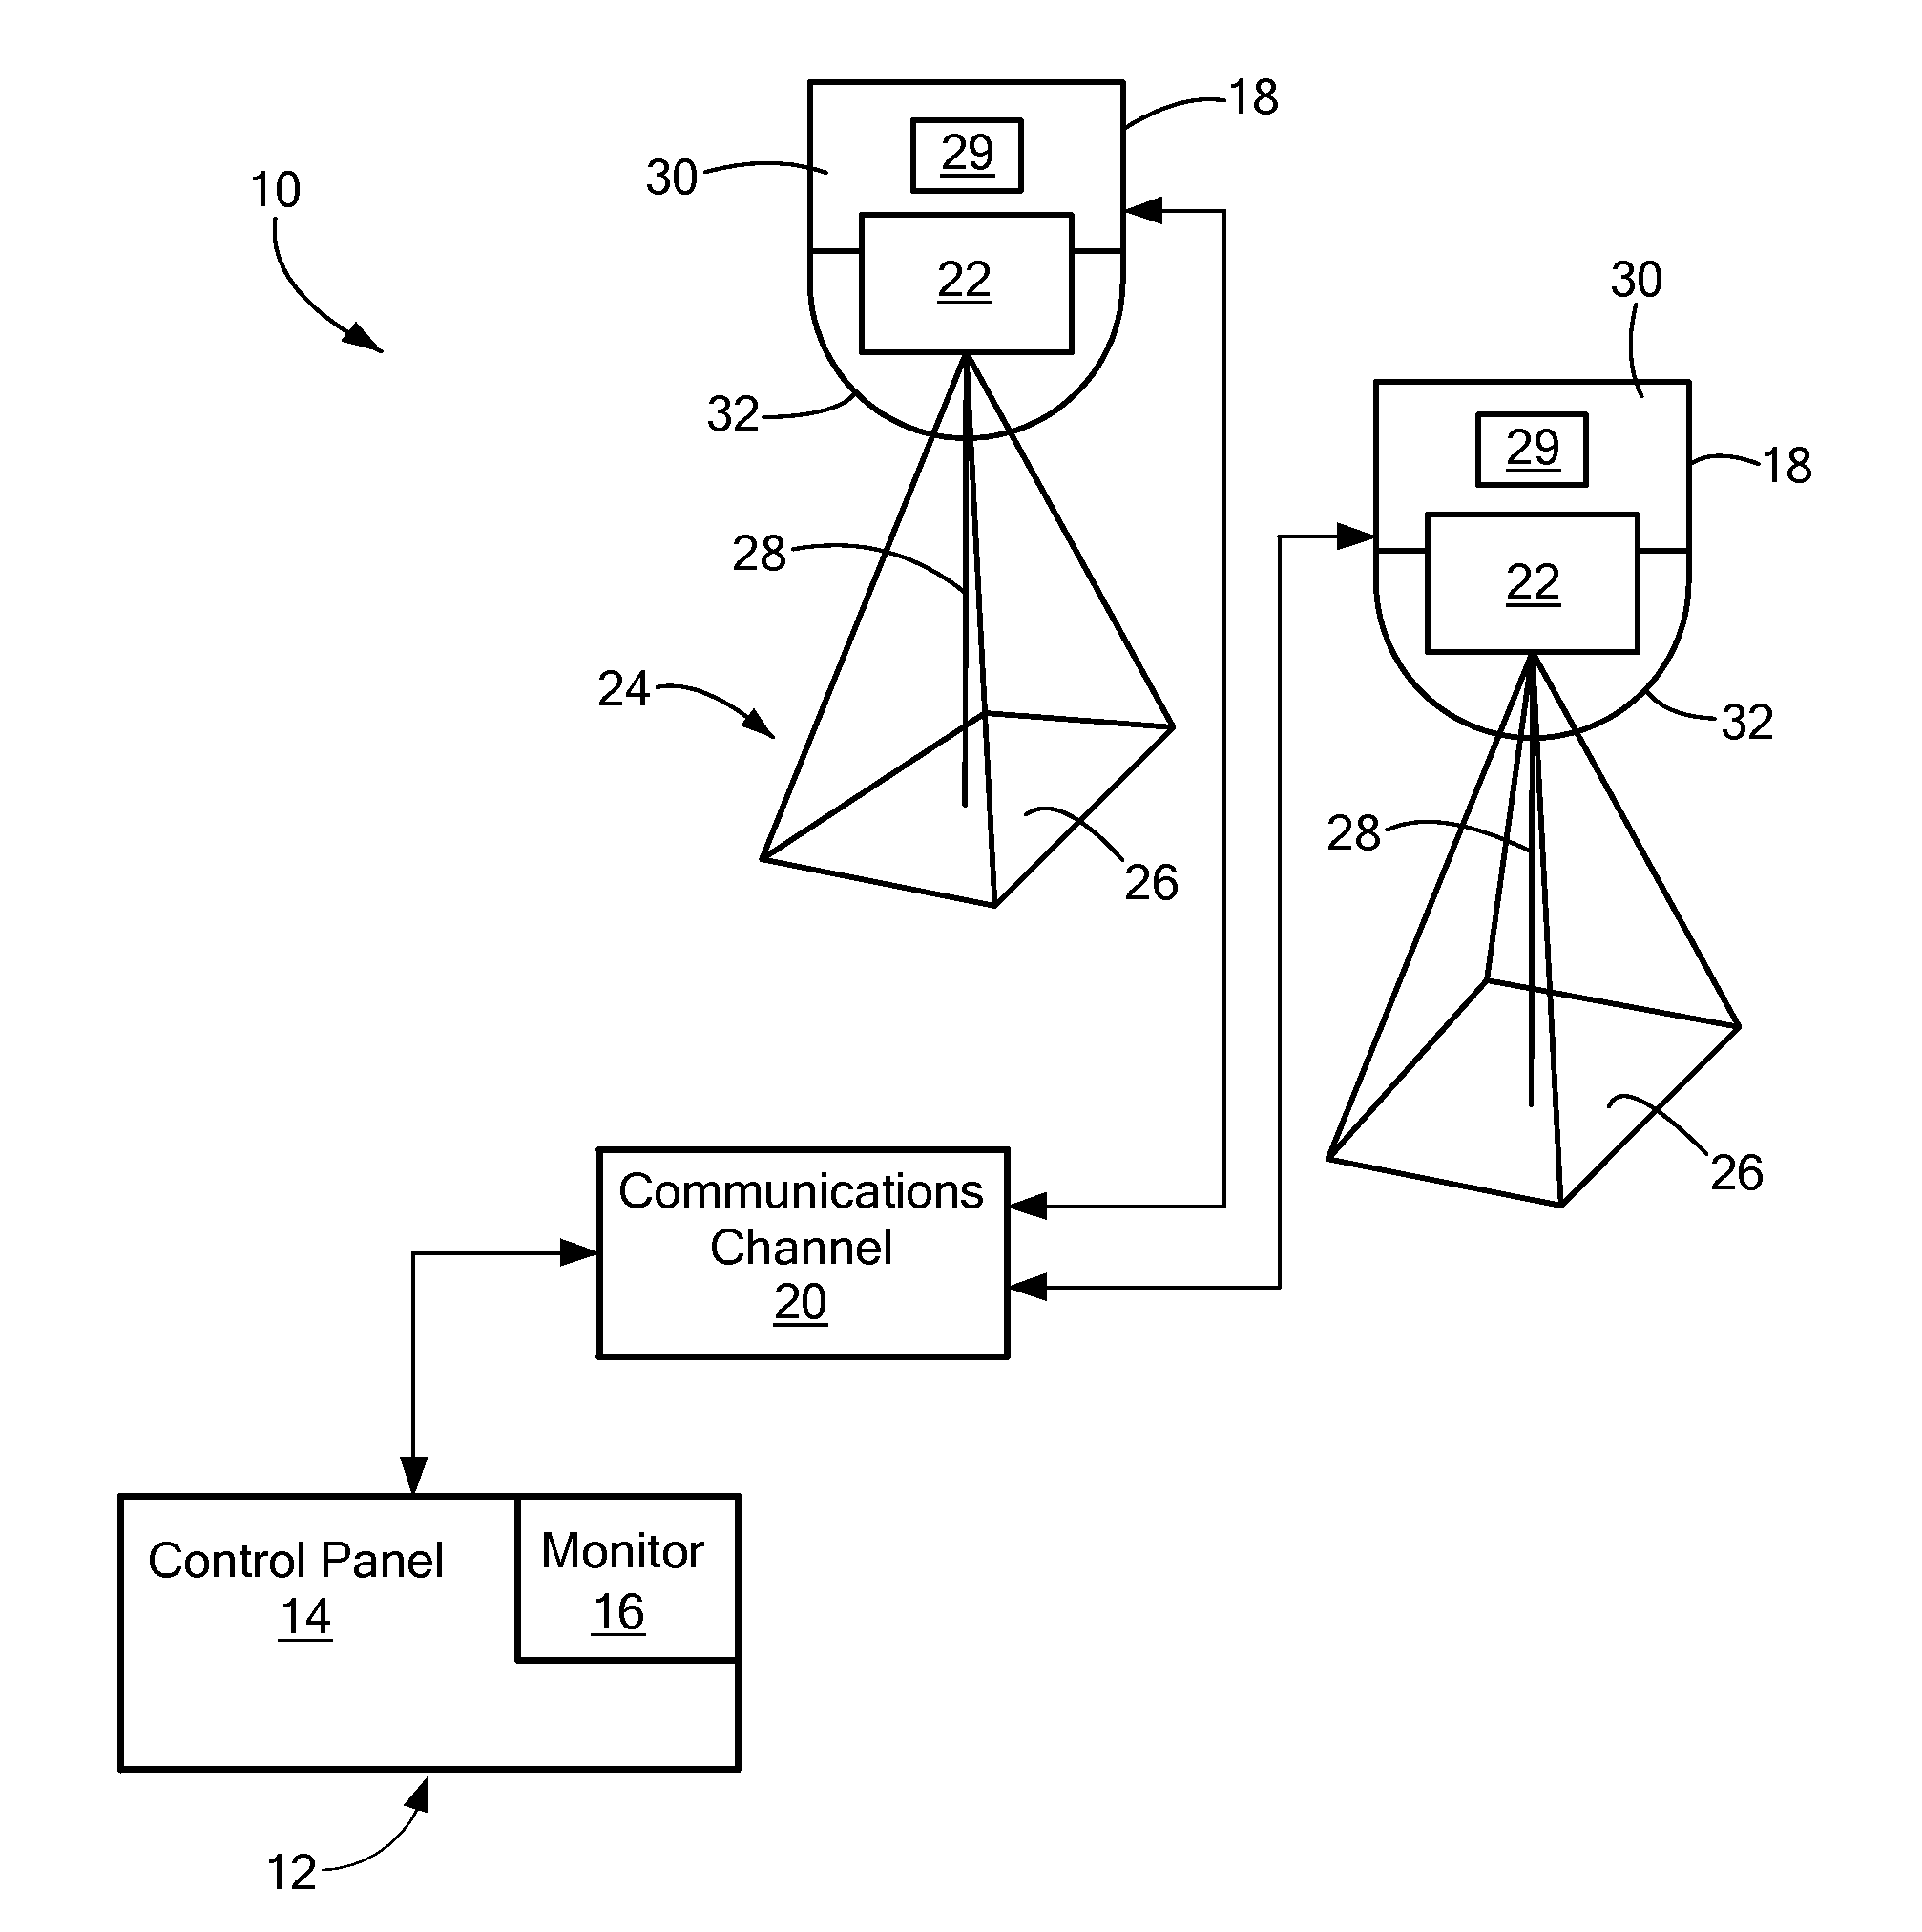 Method and system for converting privacy zone planar images to their corresponding pan/tilt coordinates